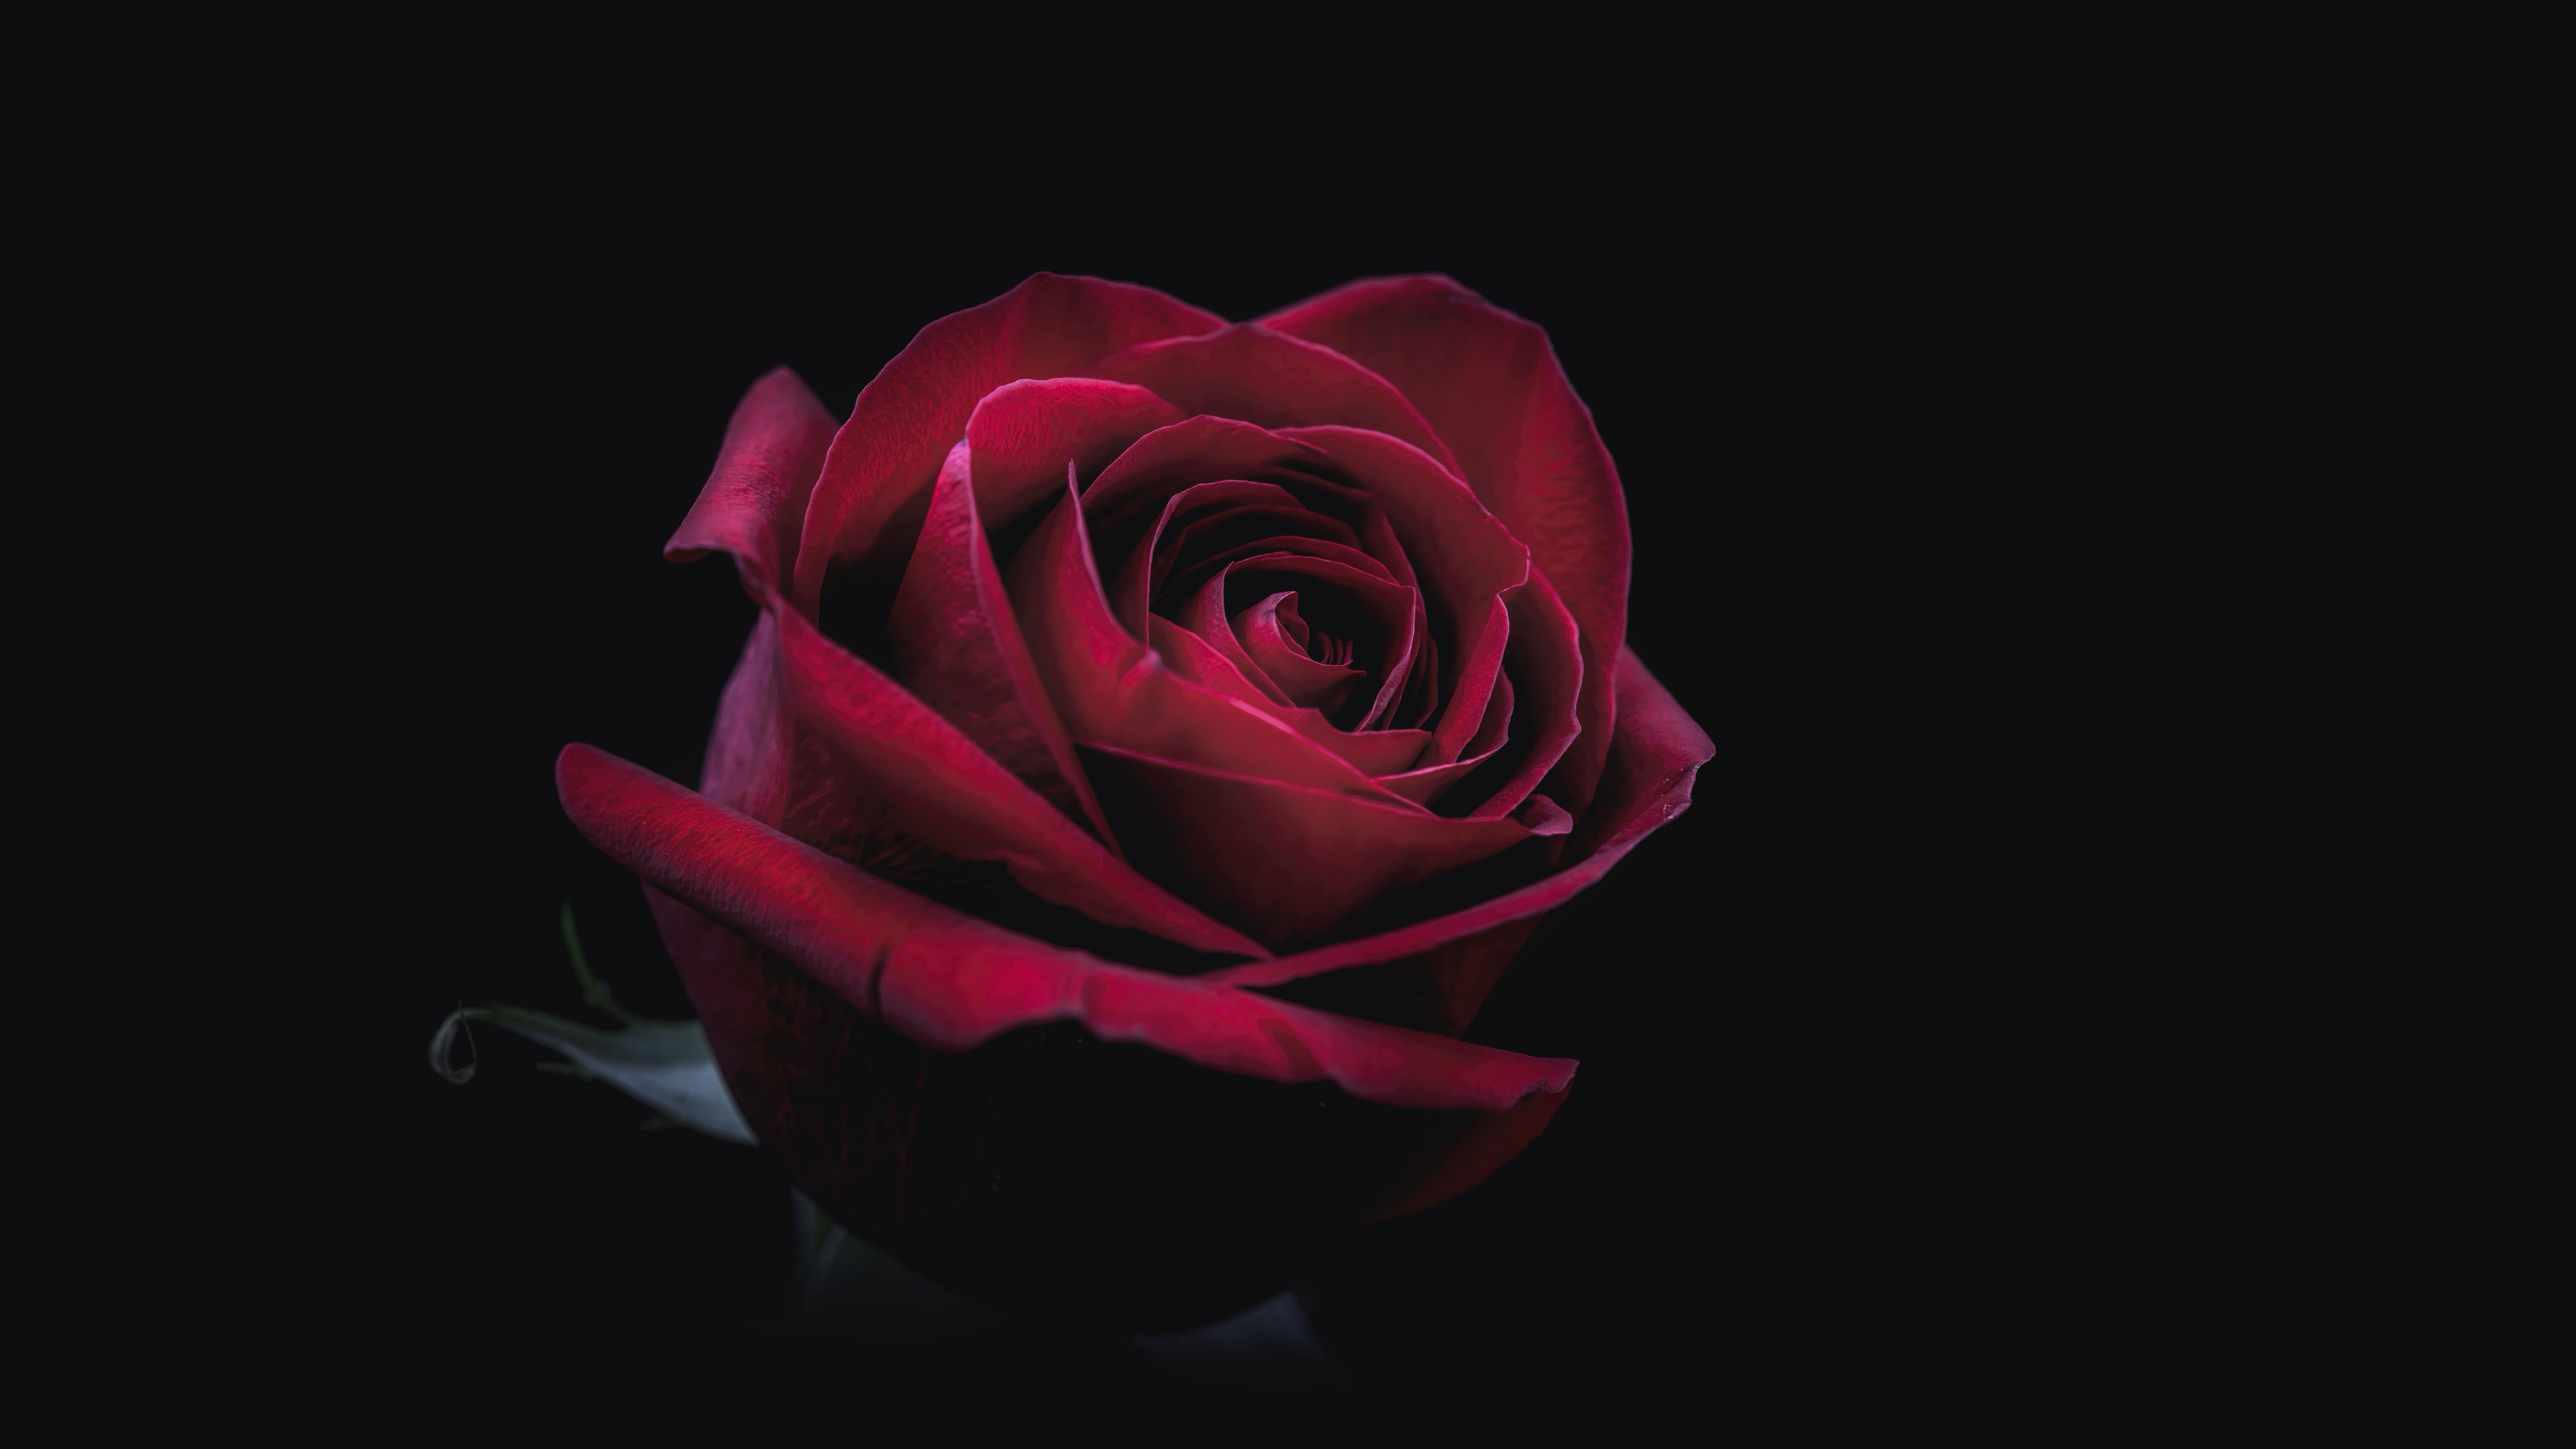 General 7680x4320 Justiony Wicj rose plants flowers red flowers simple background black background